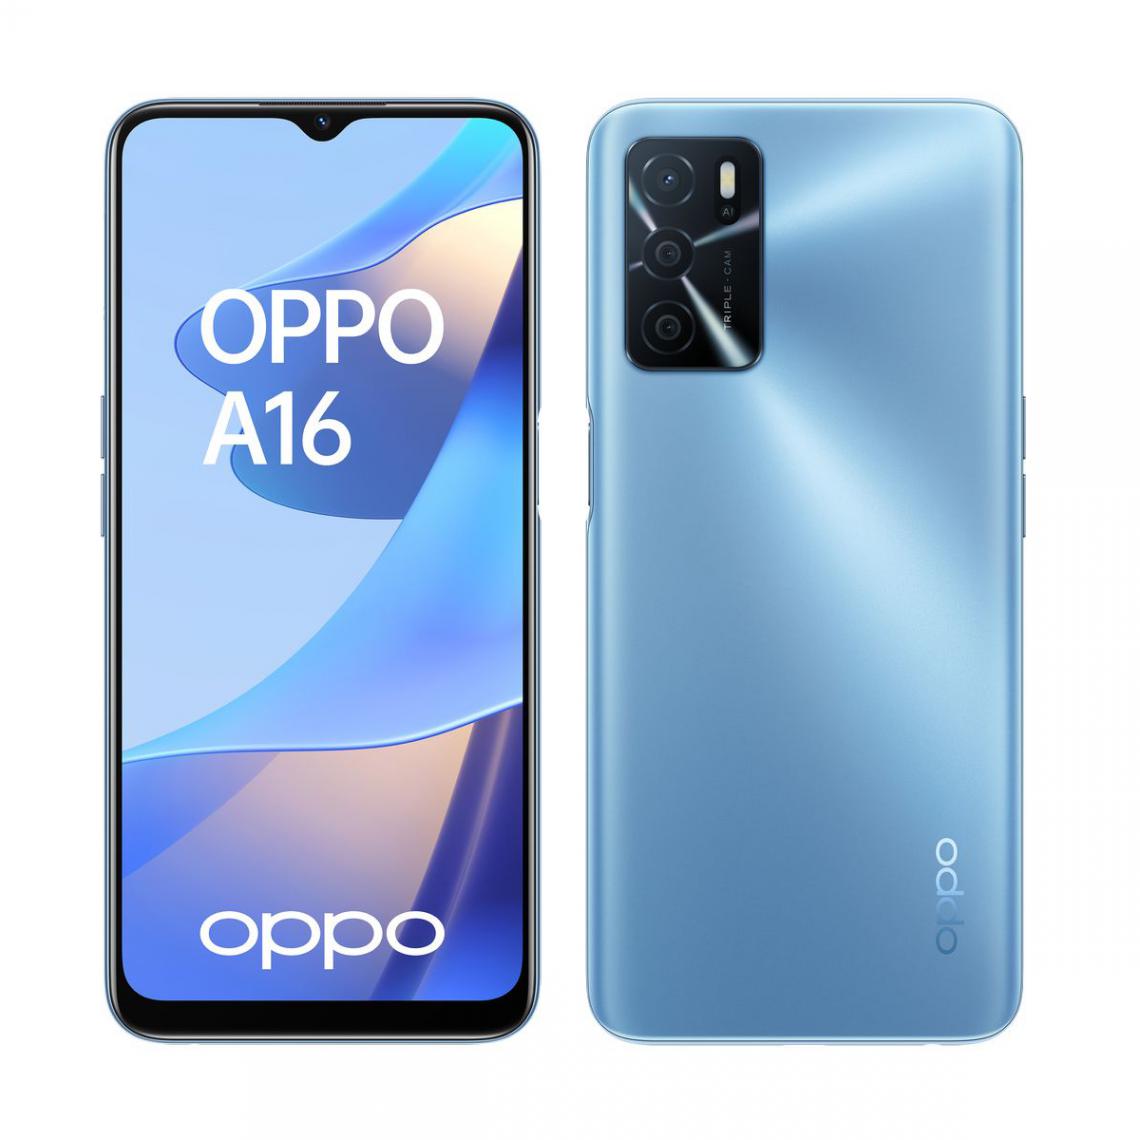 Oppo - A16 - 64 Go - Bleu - Smartphone Android